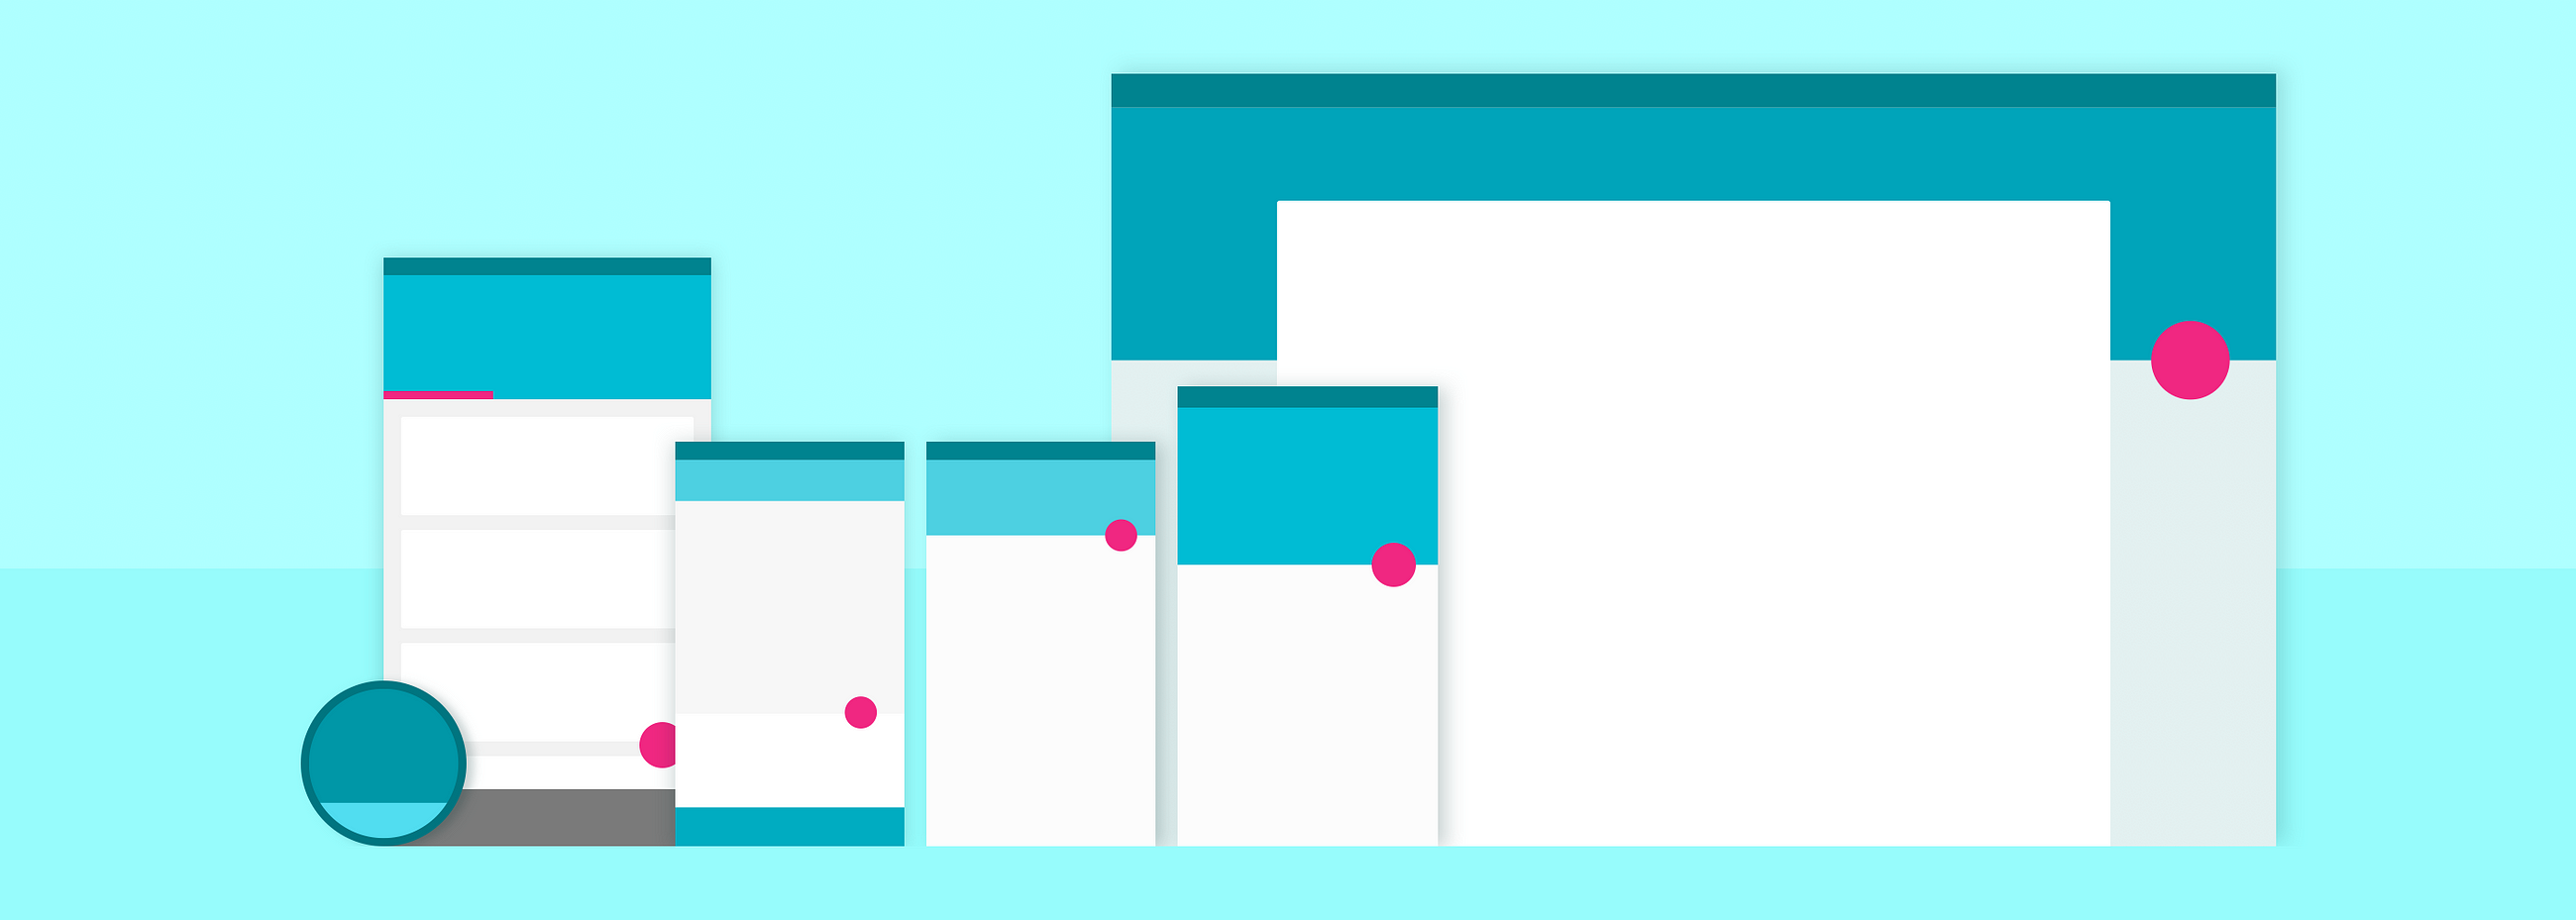 Eight don’ts for your Material Design app – Prototypr2600 x 928